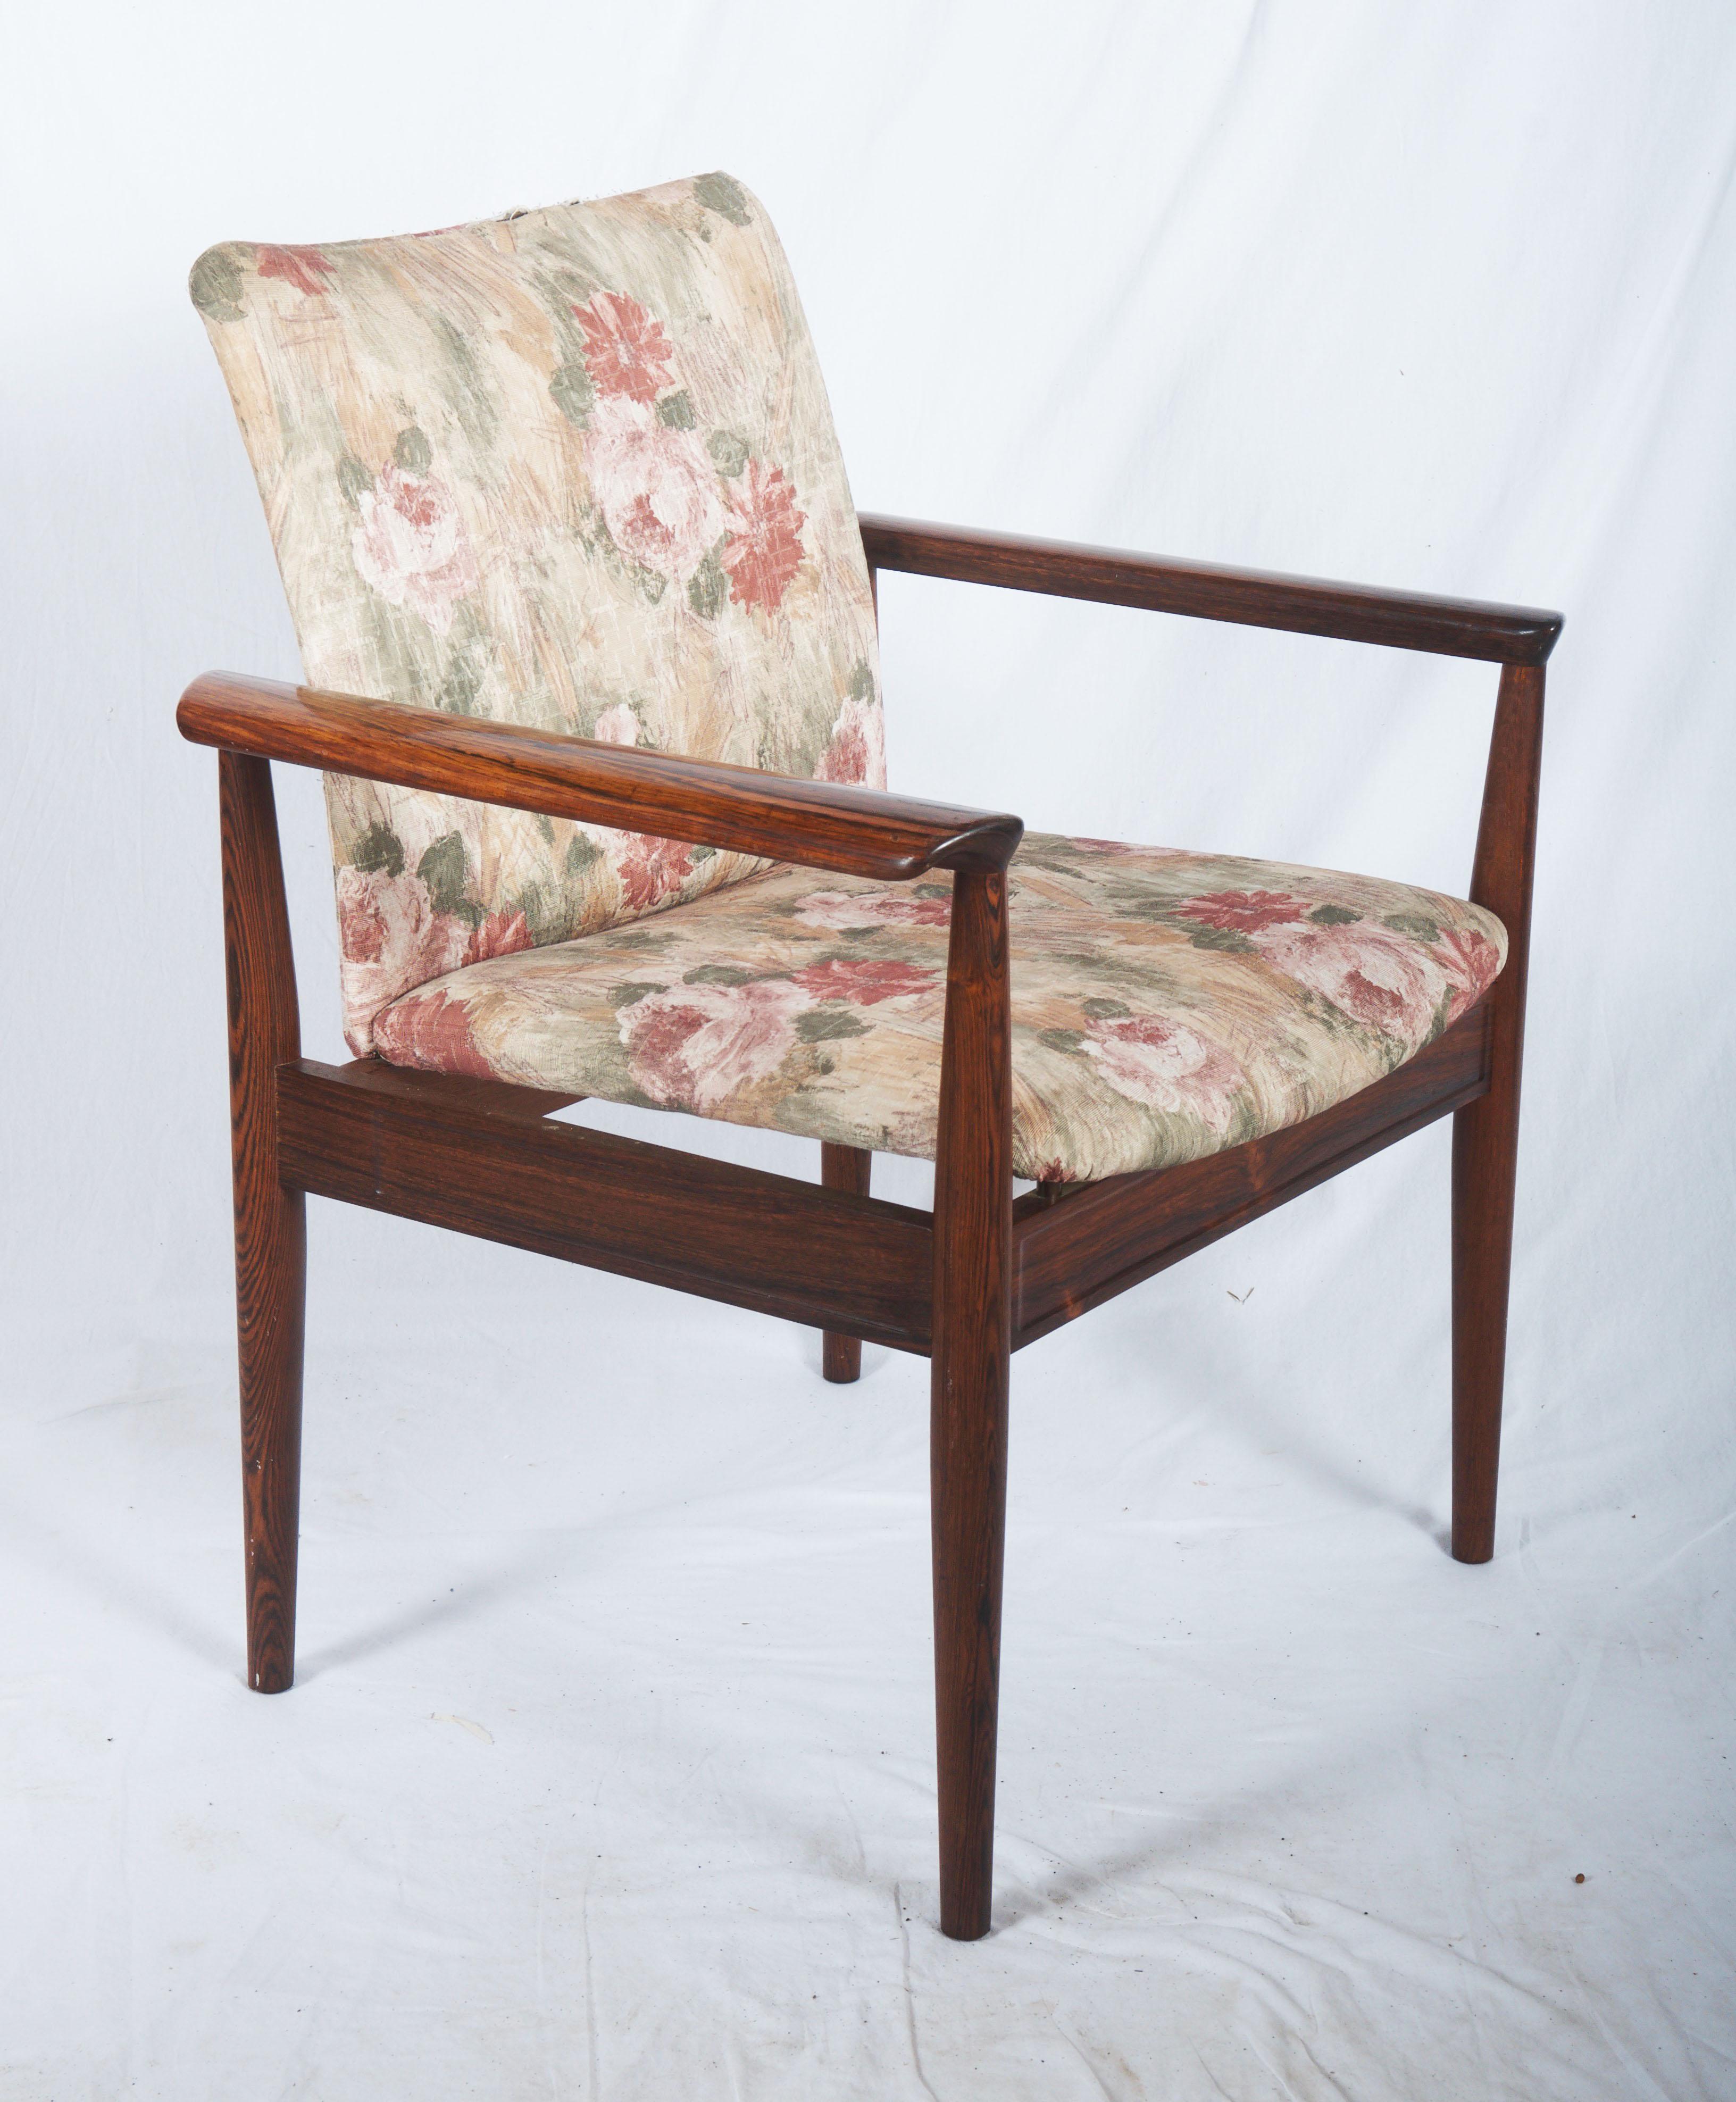 Finn Juhl, diplomat desk chair or armchair with frame in solid hardwood, model 209. Designed in 1963. Produced by France & Son.
Measures: H. 82 cm, SH. 44 cm, B. 69 cm.
Used but still in very good condition, new upholstery on request possible.
 